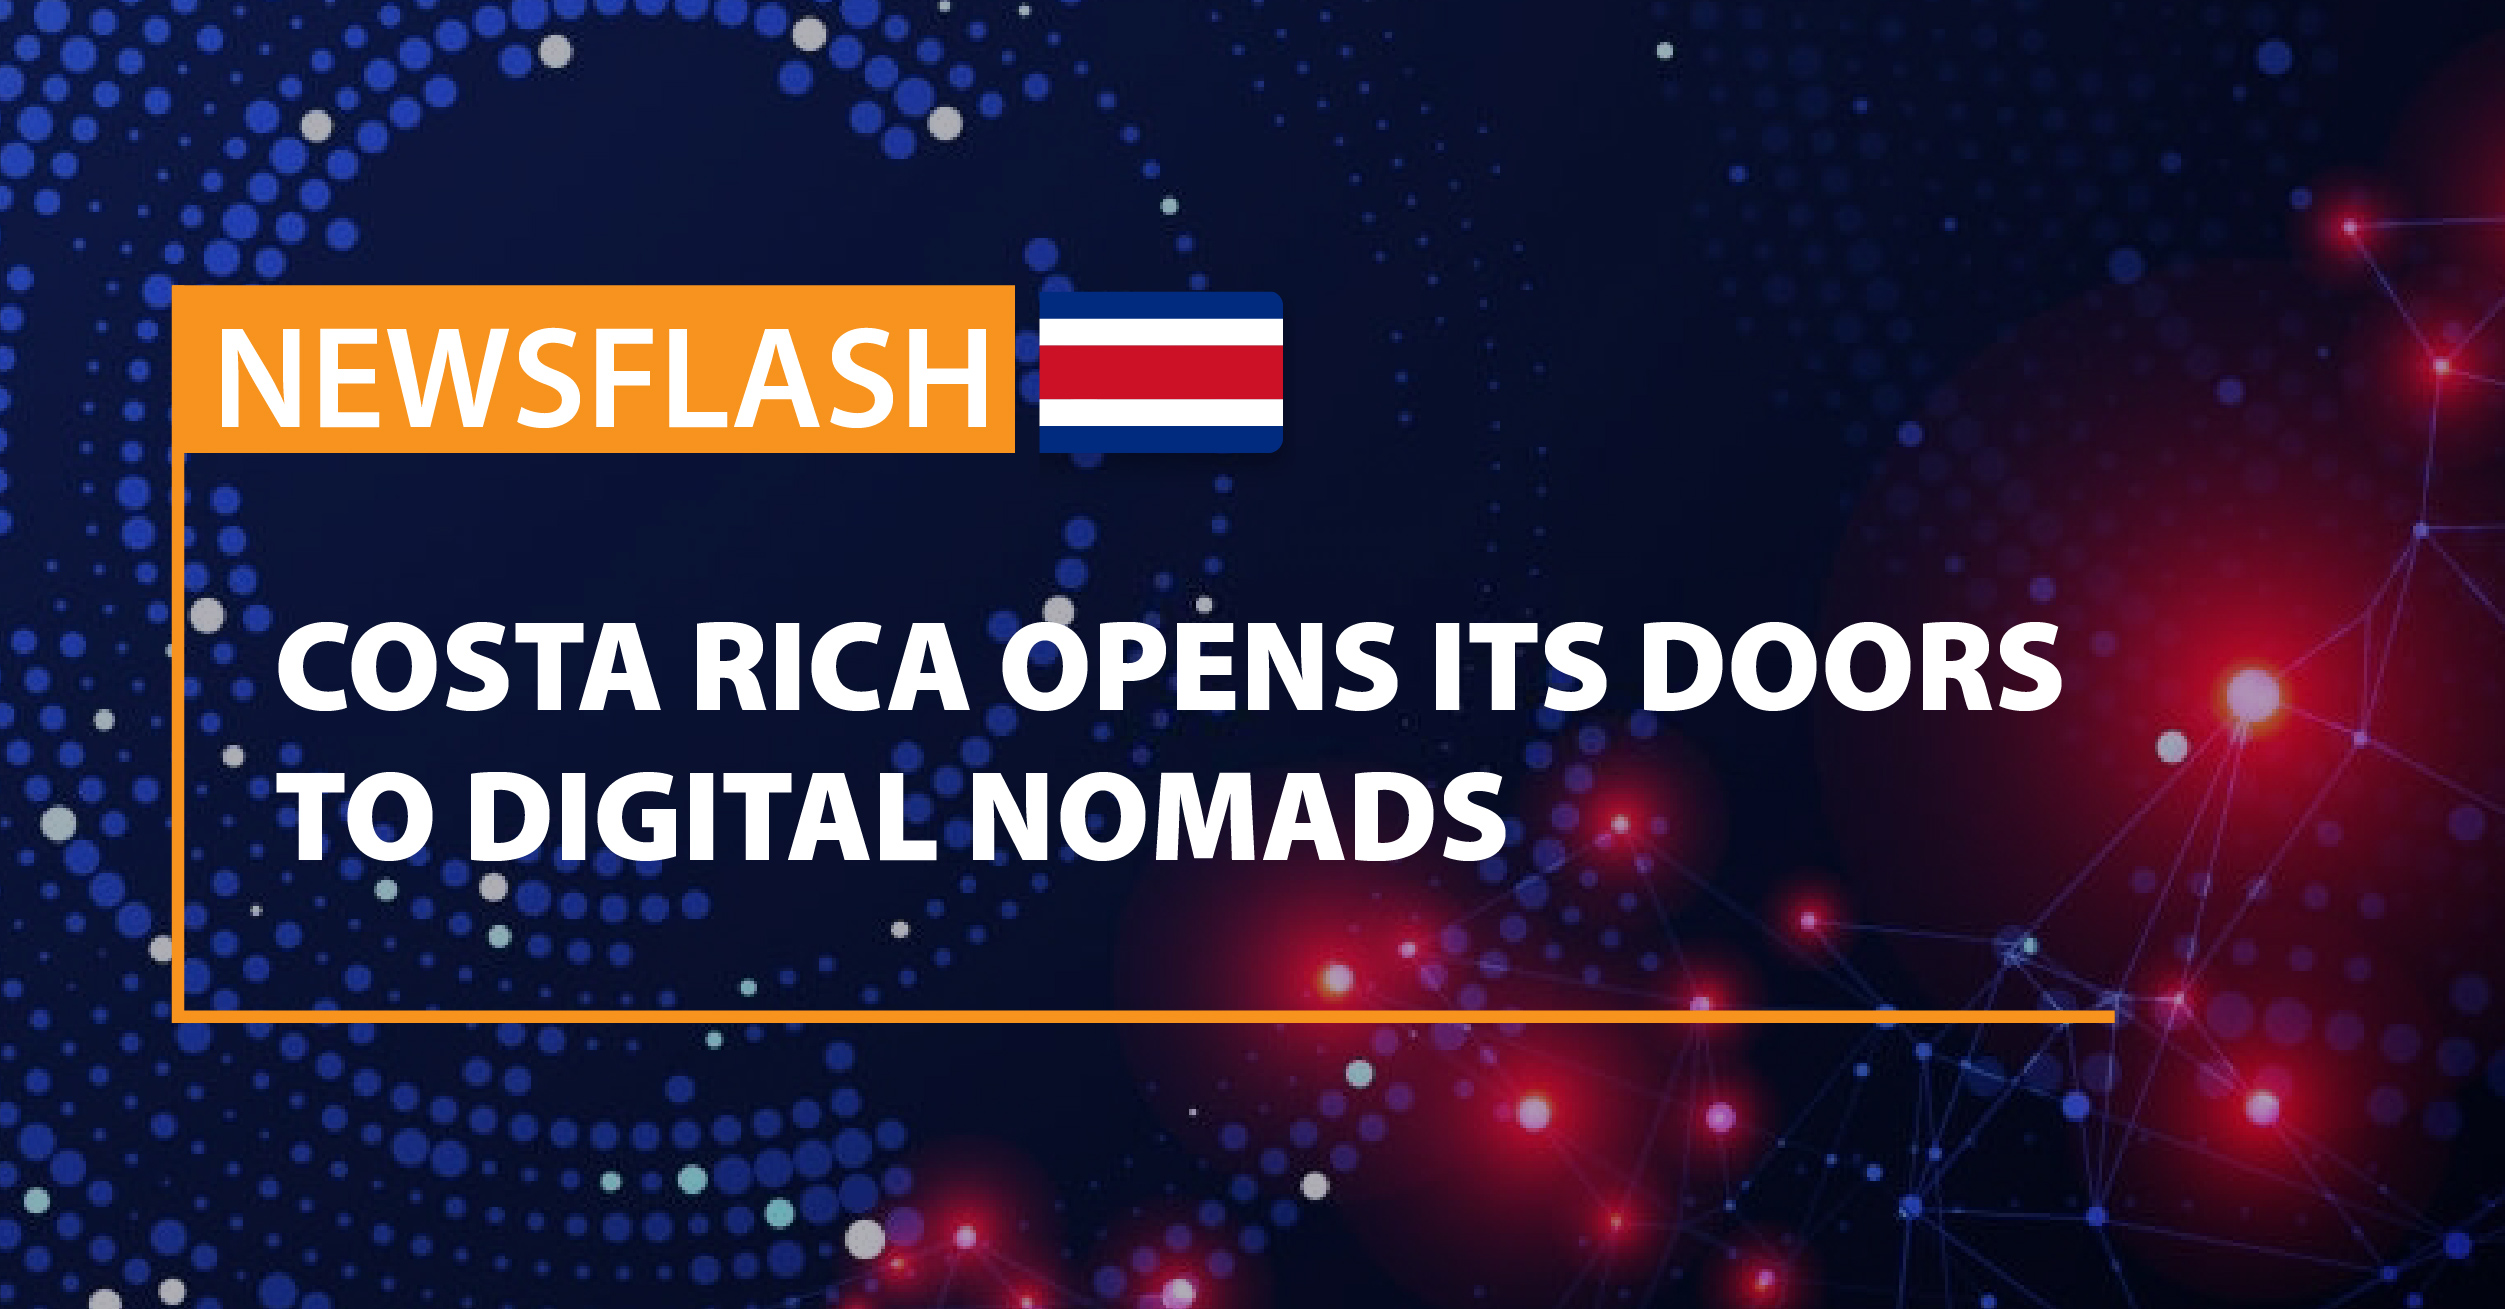 Costa Rica opens its doors to digital nomads